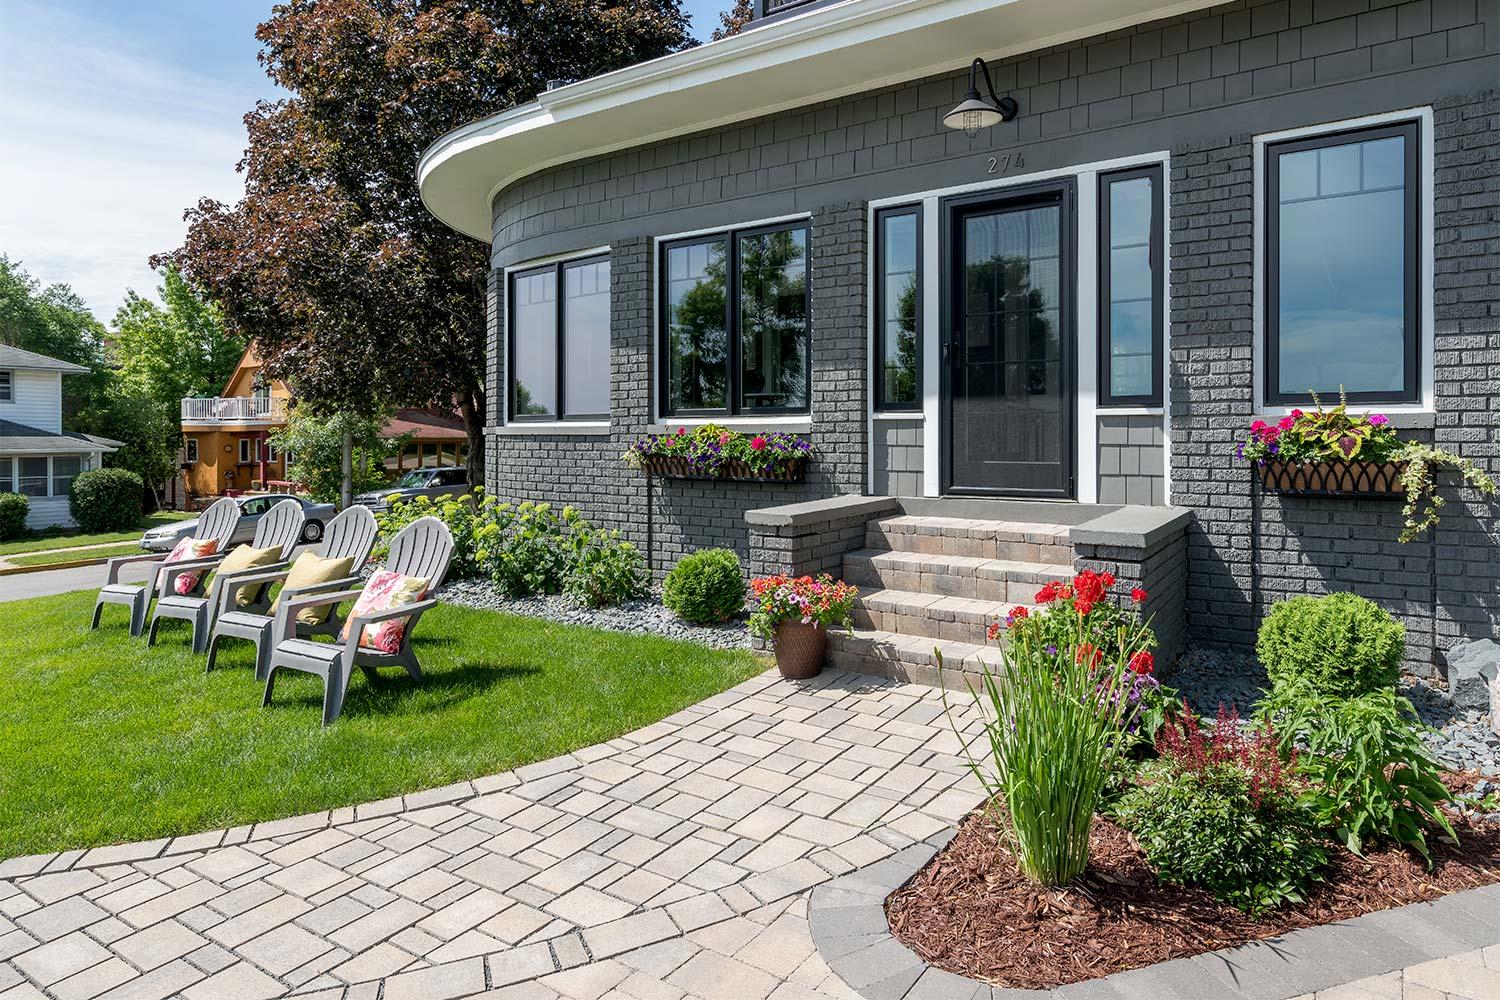 Permeable paver walkway leads to front door and steps past new lawn and four lawn chairs.